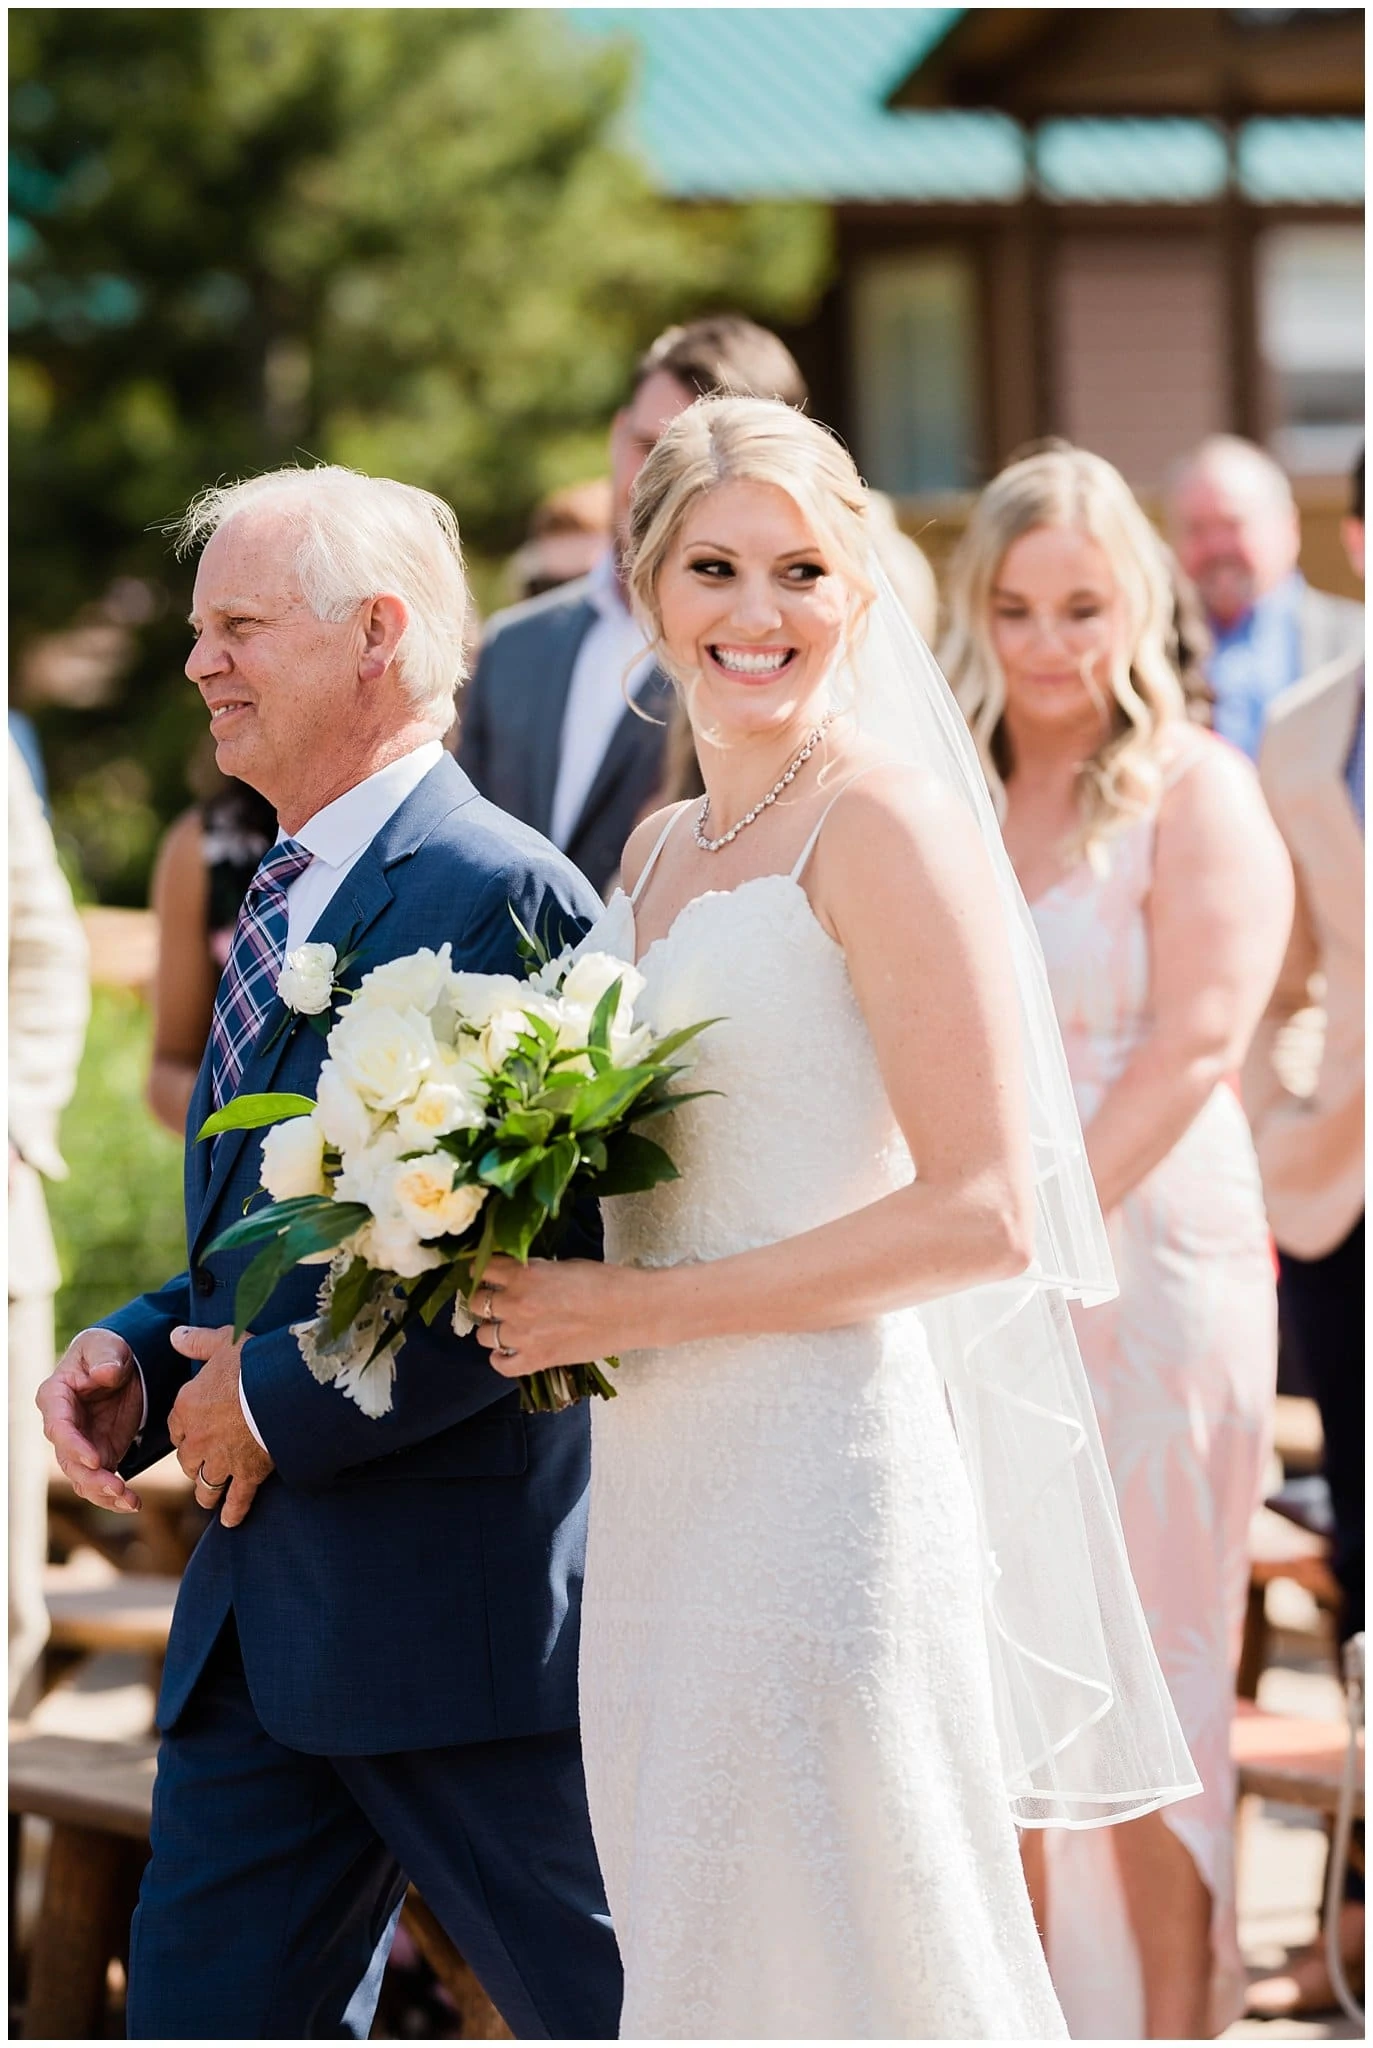 father walks daughter down the aisle at intimate Colorado wedding at Piney River Ranch Summer Wedding by Rocky Mountain wedding photographer Jennie Crate photographer